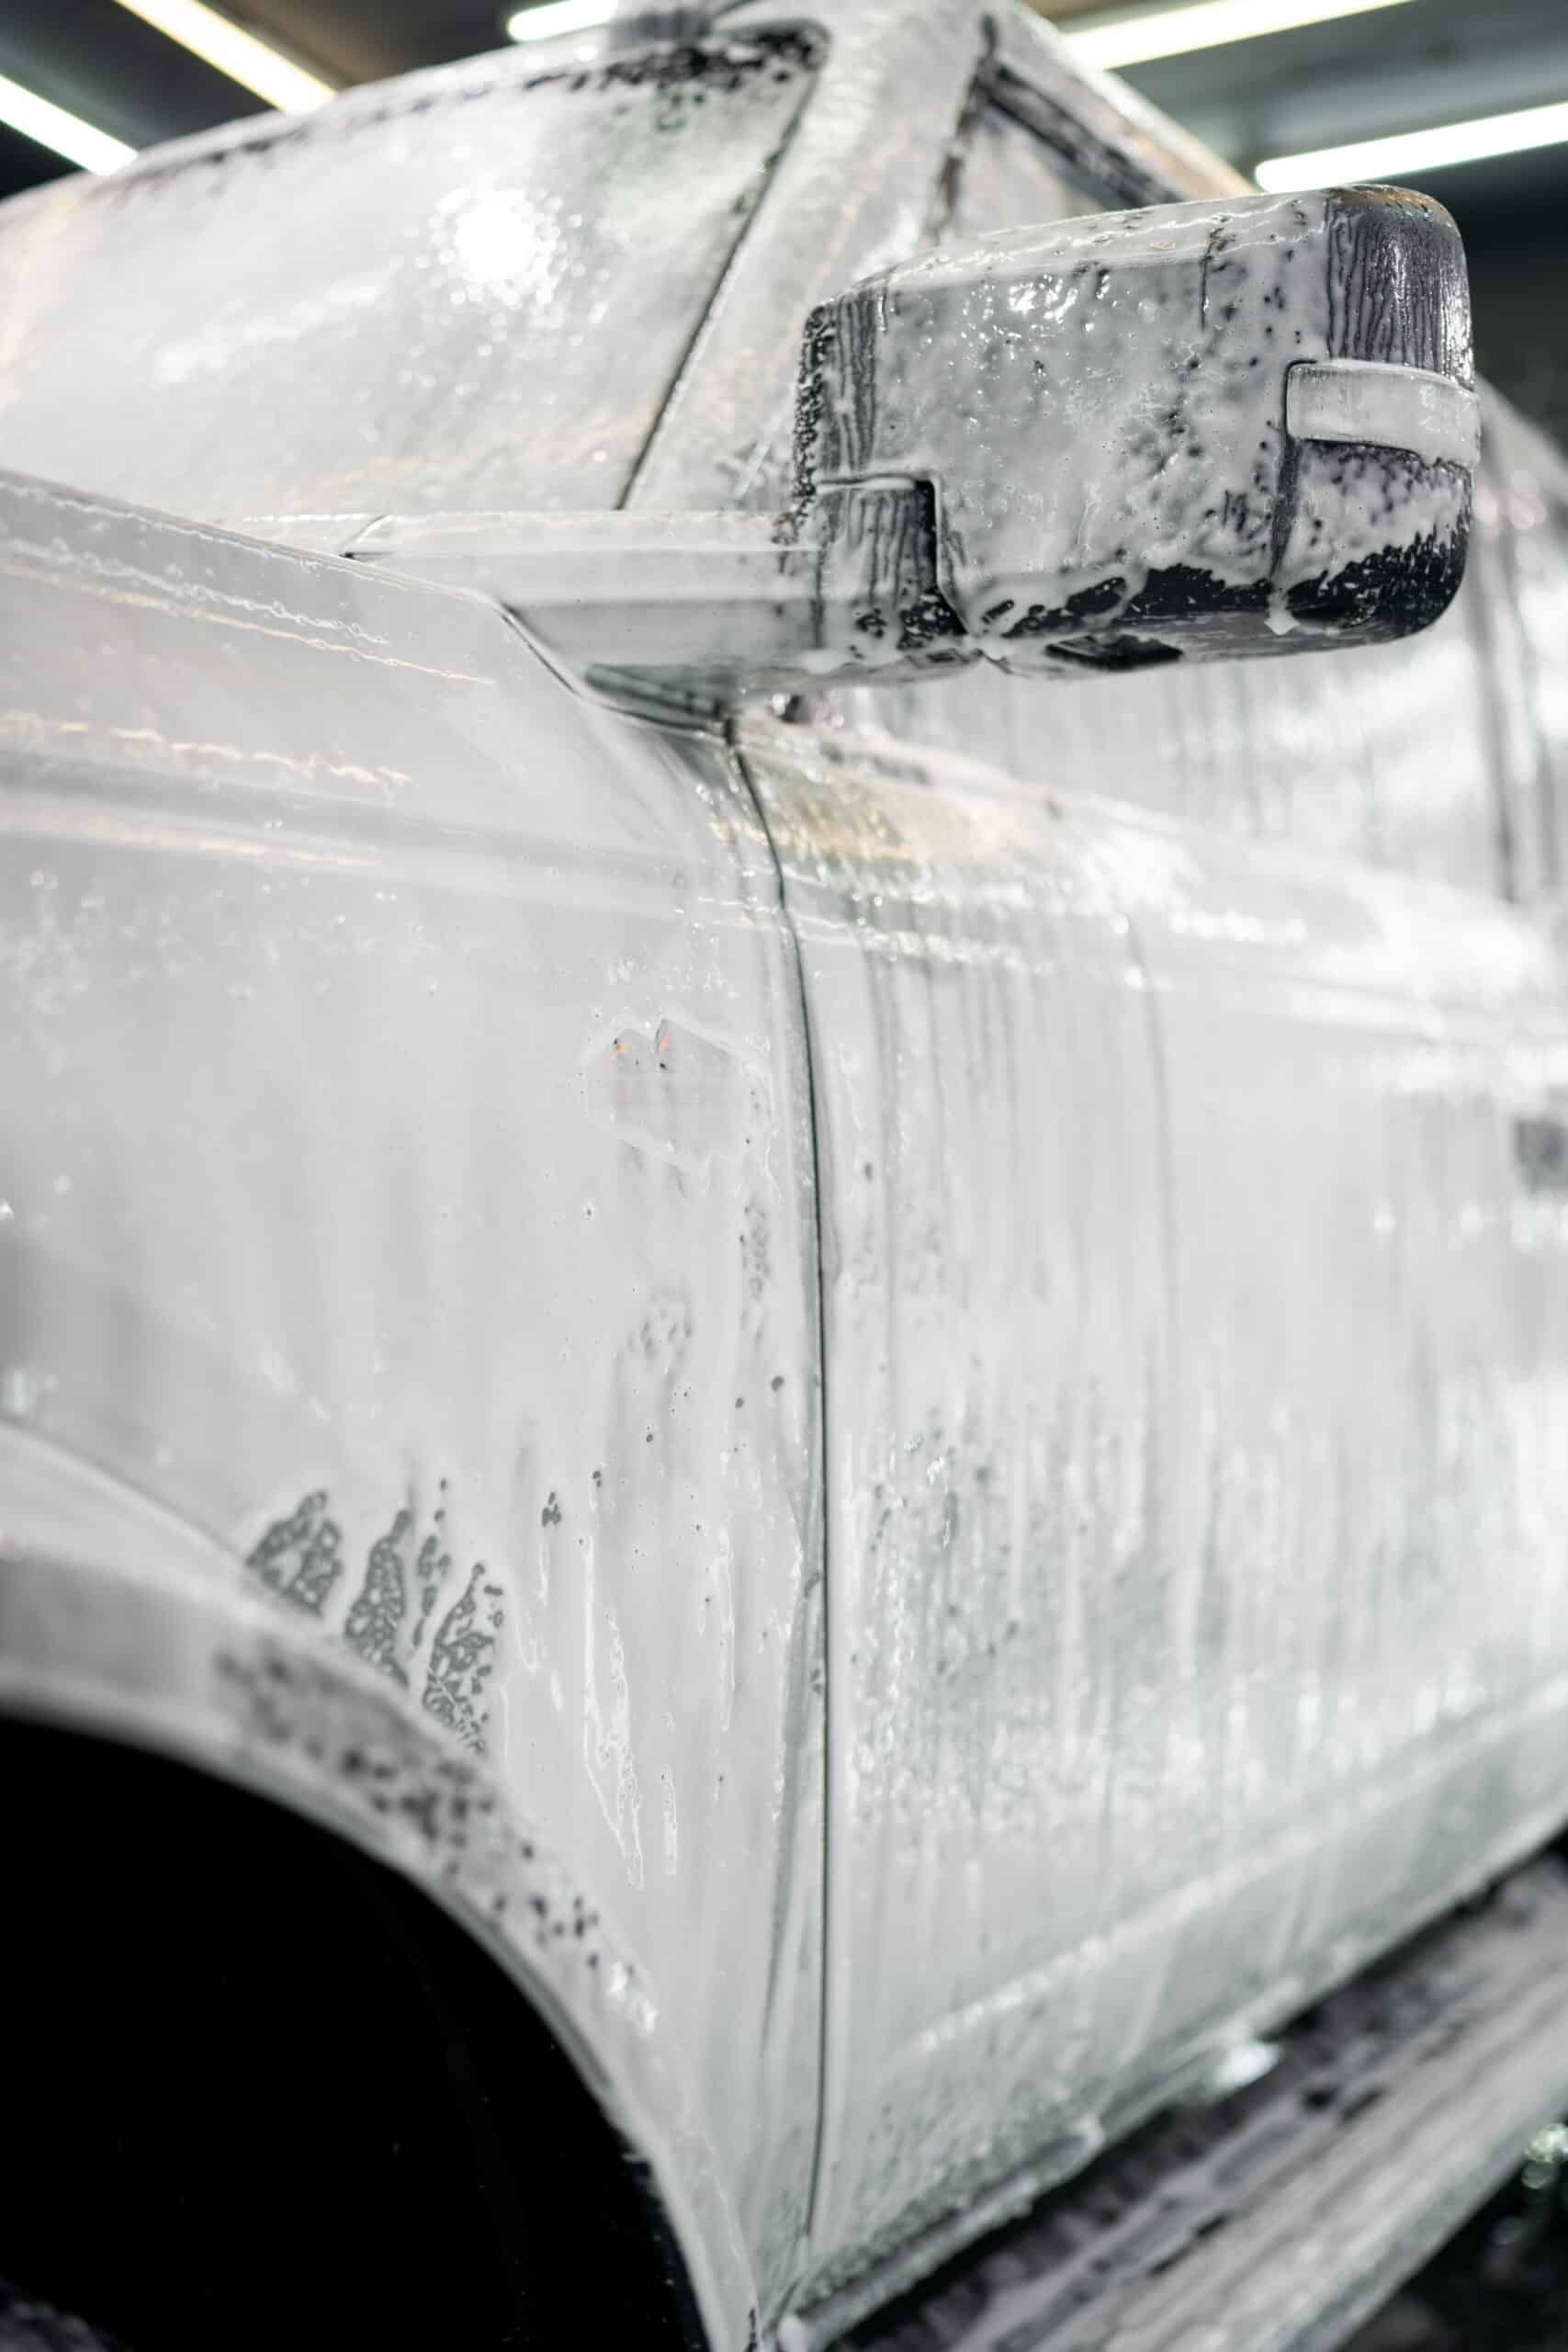 A white truck is covered in foam at a car wash.